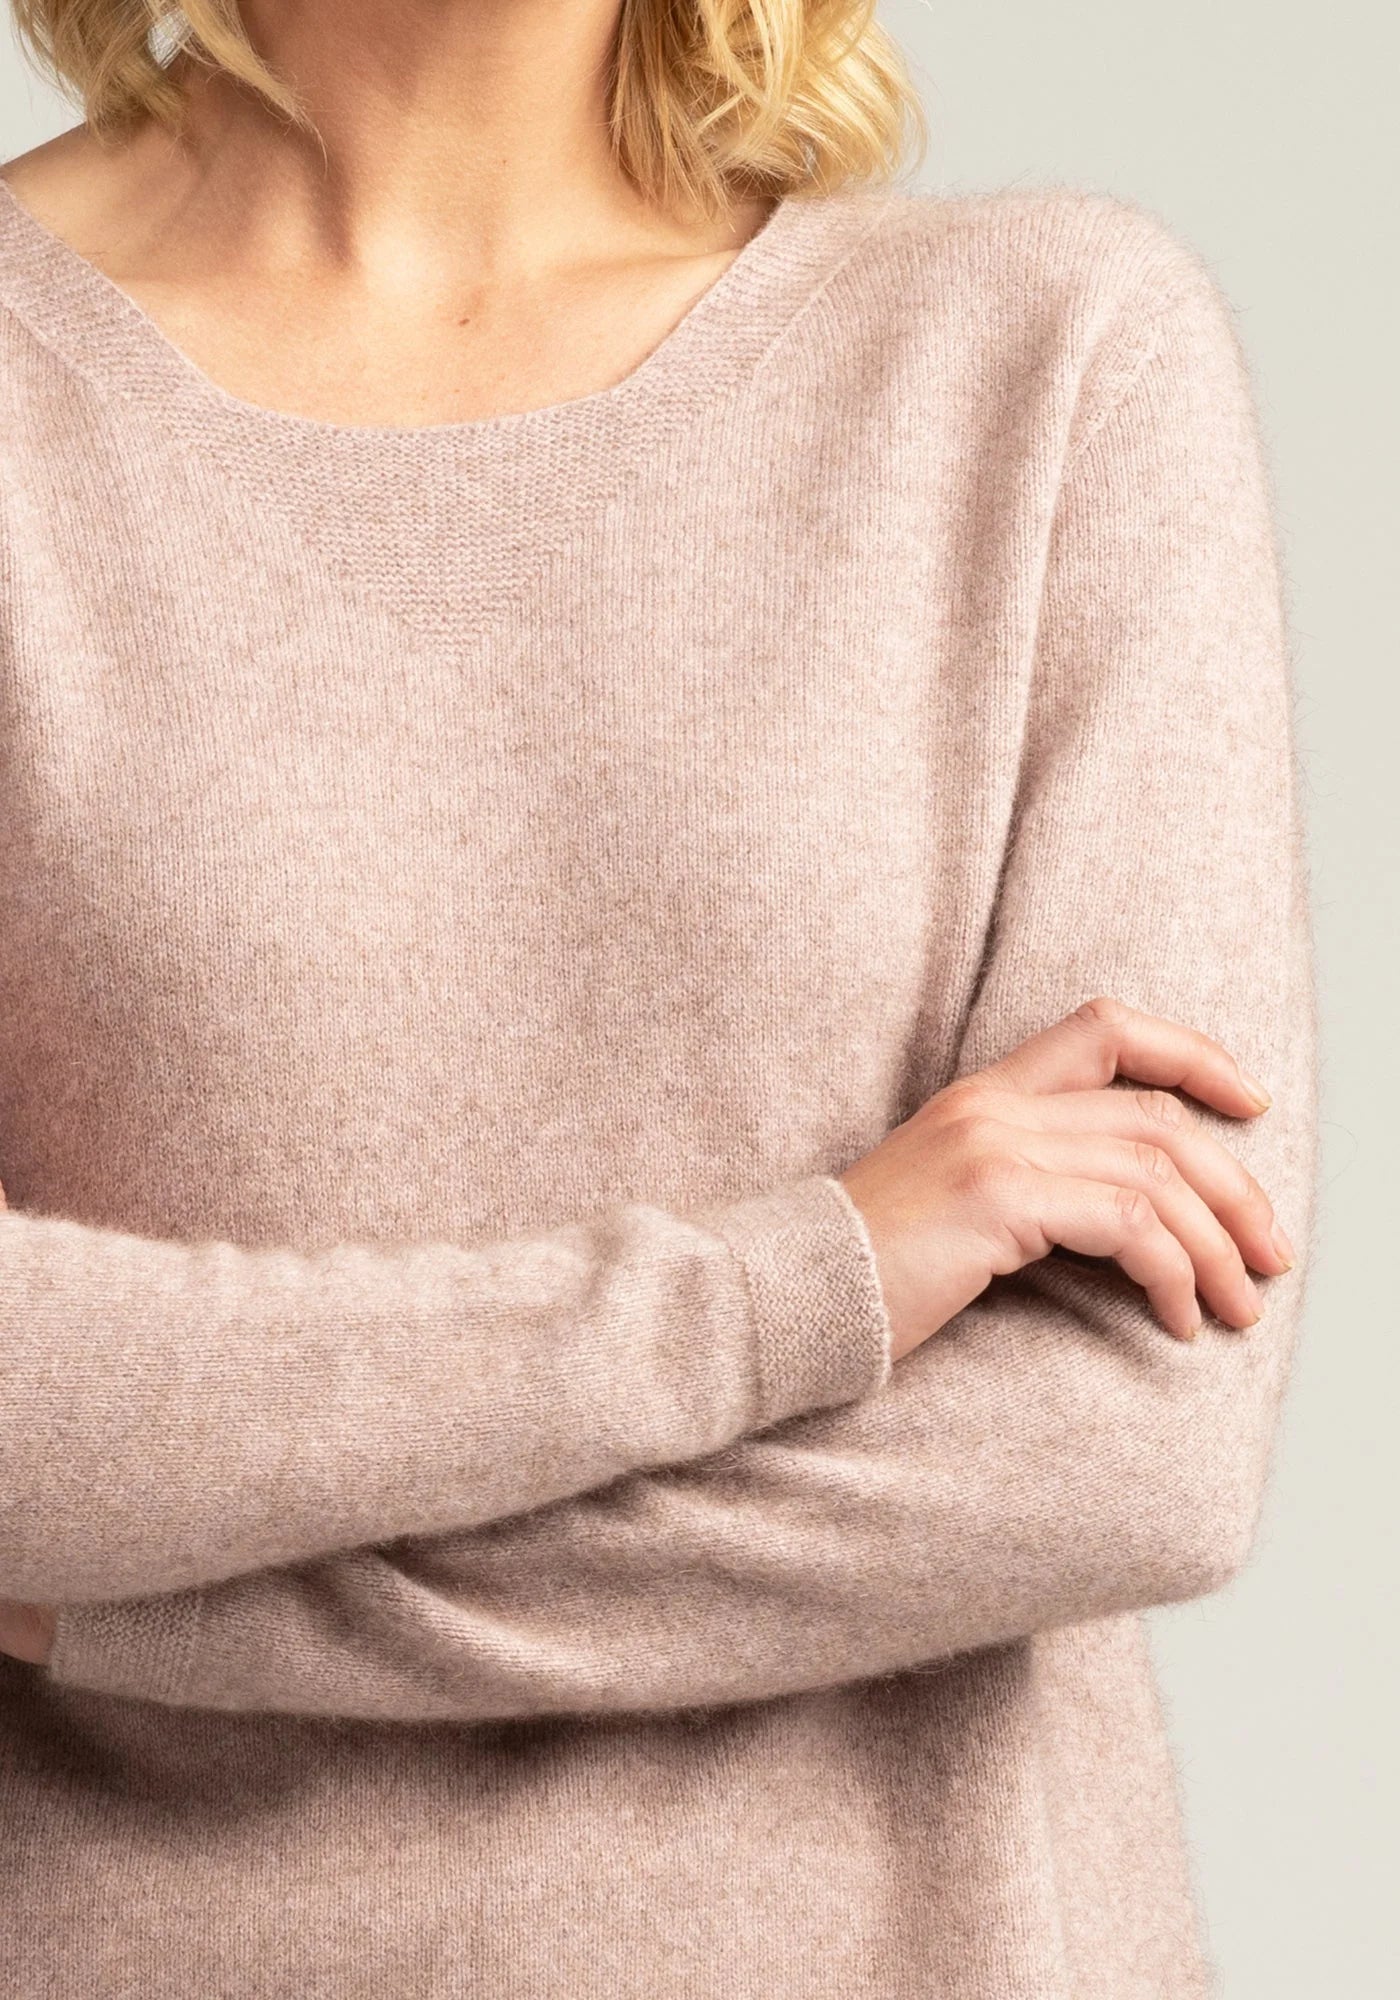 "Discover the allure of blush pink in our merino wool sweater. Comfort meets couture in every stitch."